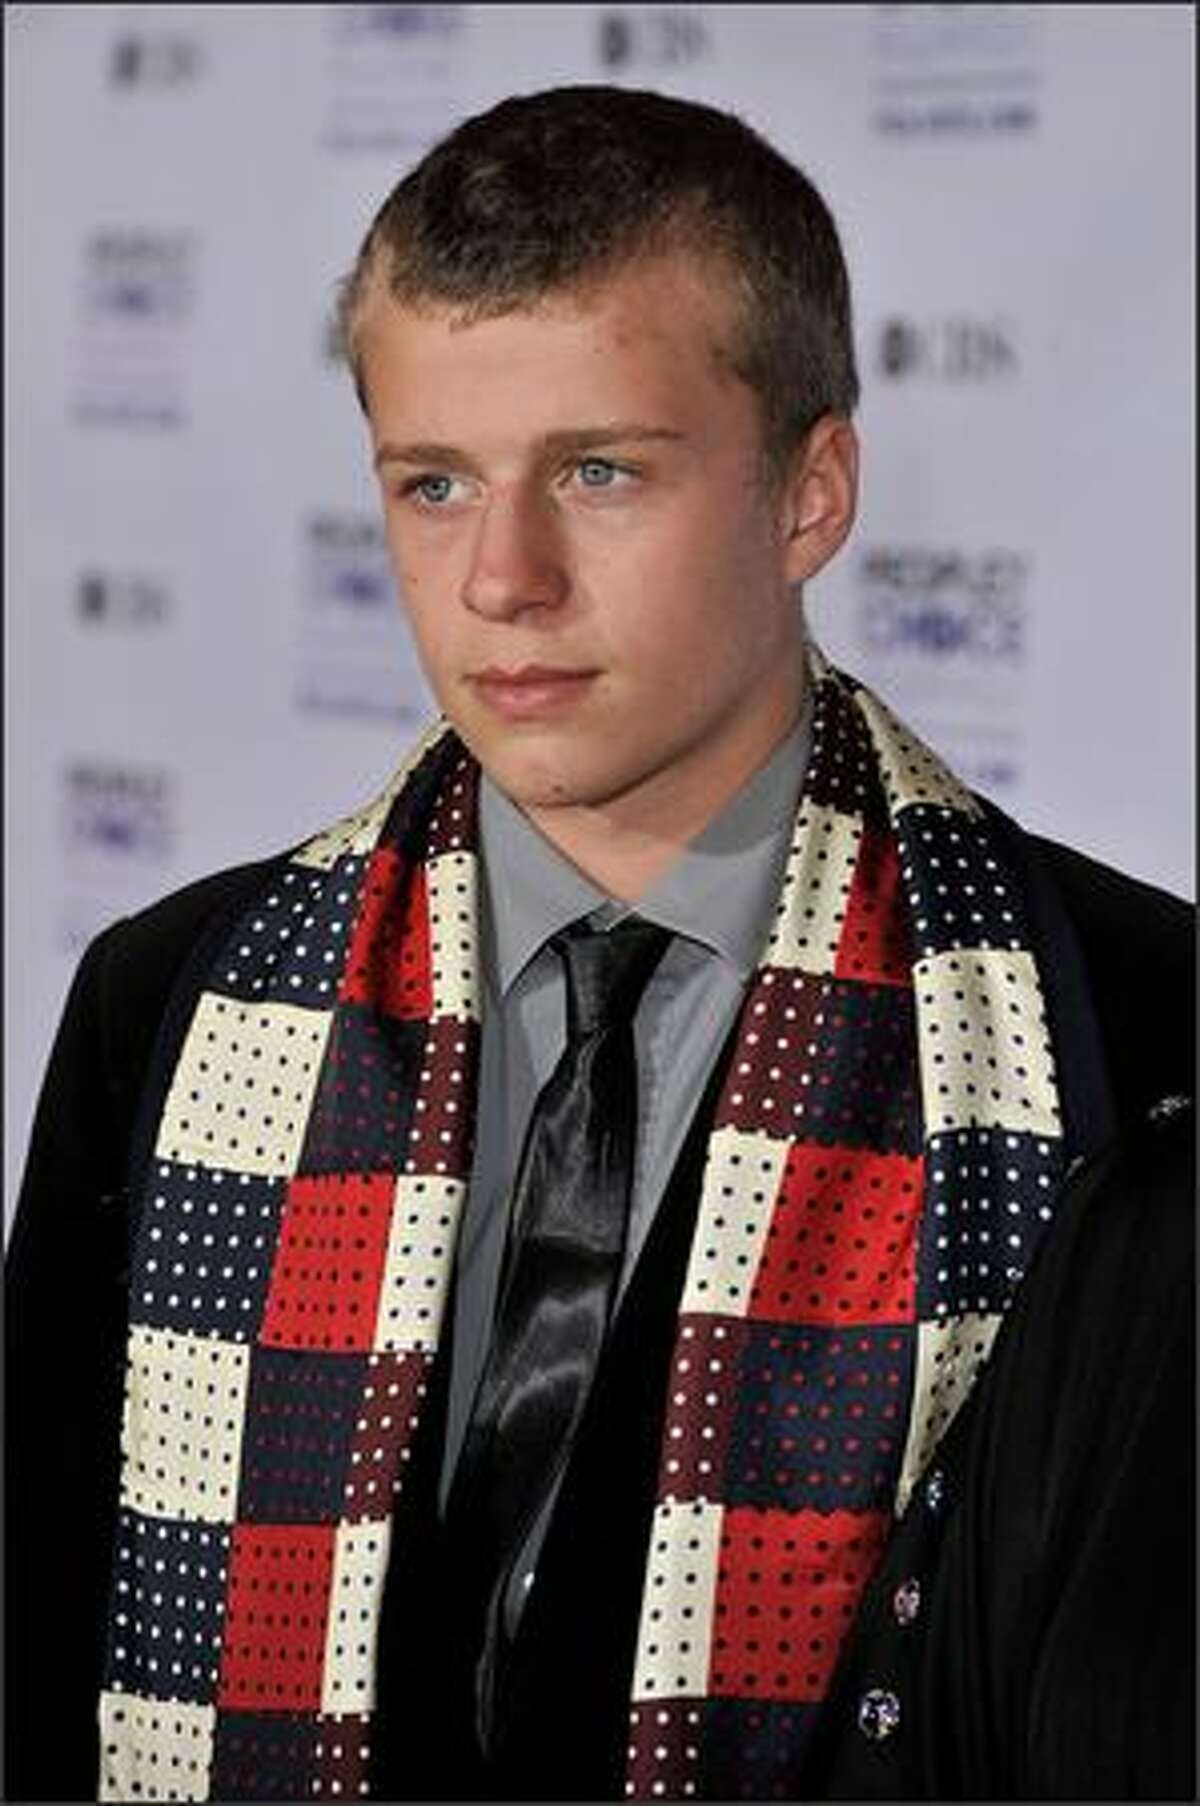 Conrad Hilton Paris Hilton's youngest brother was charged with interfering with a flight crew on a trip from London on July 31, 2014. Authorities say he complained another passenger was giving him the "stink eye," threatened to kill several flight attendants and a co-pilot, threw a punch inches from a flight attendant's head, smoked a cigarette and possibly pot in lavatories and called other passengers "peasants" before falling asleep and being handcuffed to his seat.